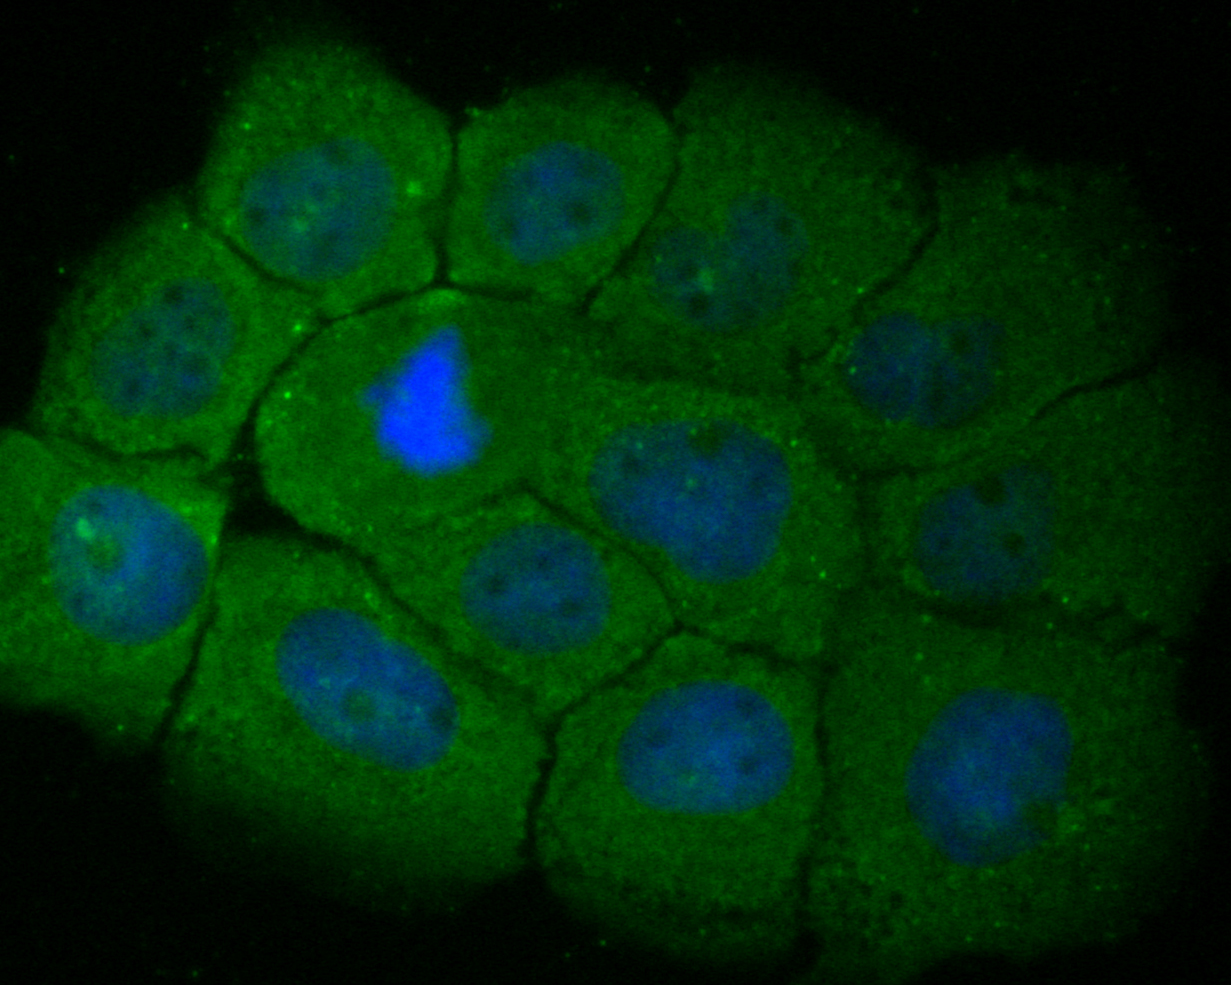 ICC staining of RBPMS in A431 cells (green). Formalin fixed cells were permeabilized with 0.1% Triton X-100 in TBS for 10 minutes at room temperature and blocked with 1% Blocker BSA for 15 minutes at room temperature. Cells were probed with the primary antibody (ER1901-43, 1/200) for 1 hour at room temperature, washed with PBS. Alexa Fluor®488 Goat anti-Rabbit IgG was used as the secondary antibody at 1/1,000 dilution. The nuclear counter stain is DAPI (blue).